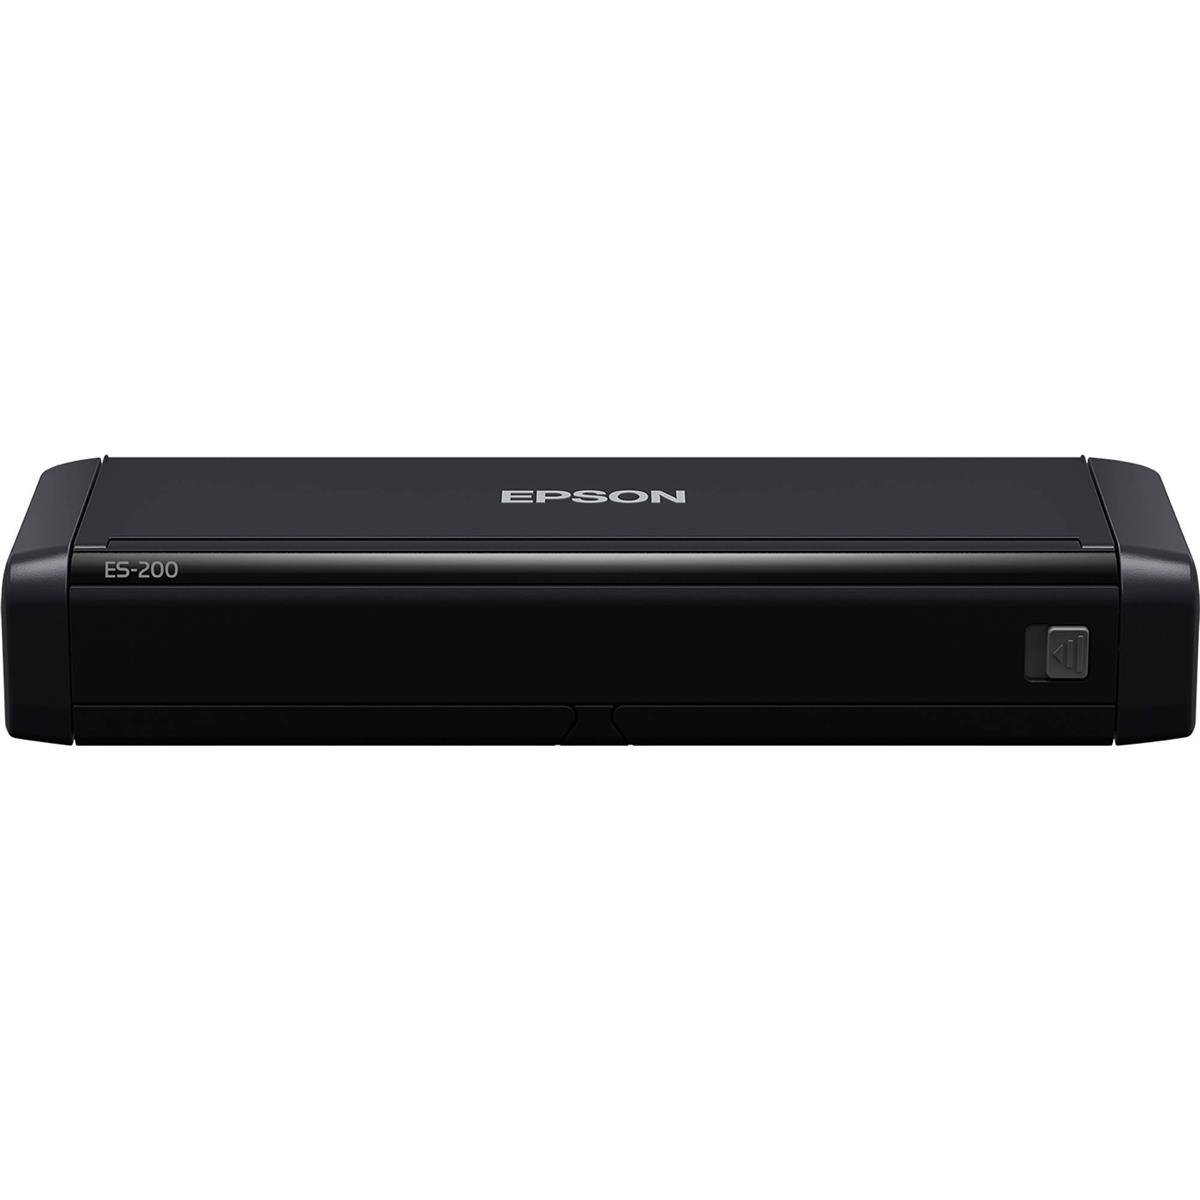 Fujitsu fi-7460 Document scanner Duplex 12 in x 17 in 600 dpi x 600 dpi up to 60 ppm (mono)   up to 60 ppm (color) ADF (100 sheets) up t